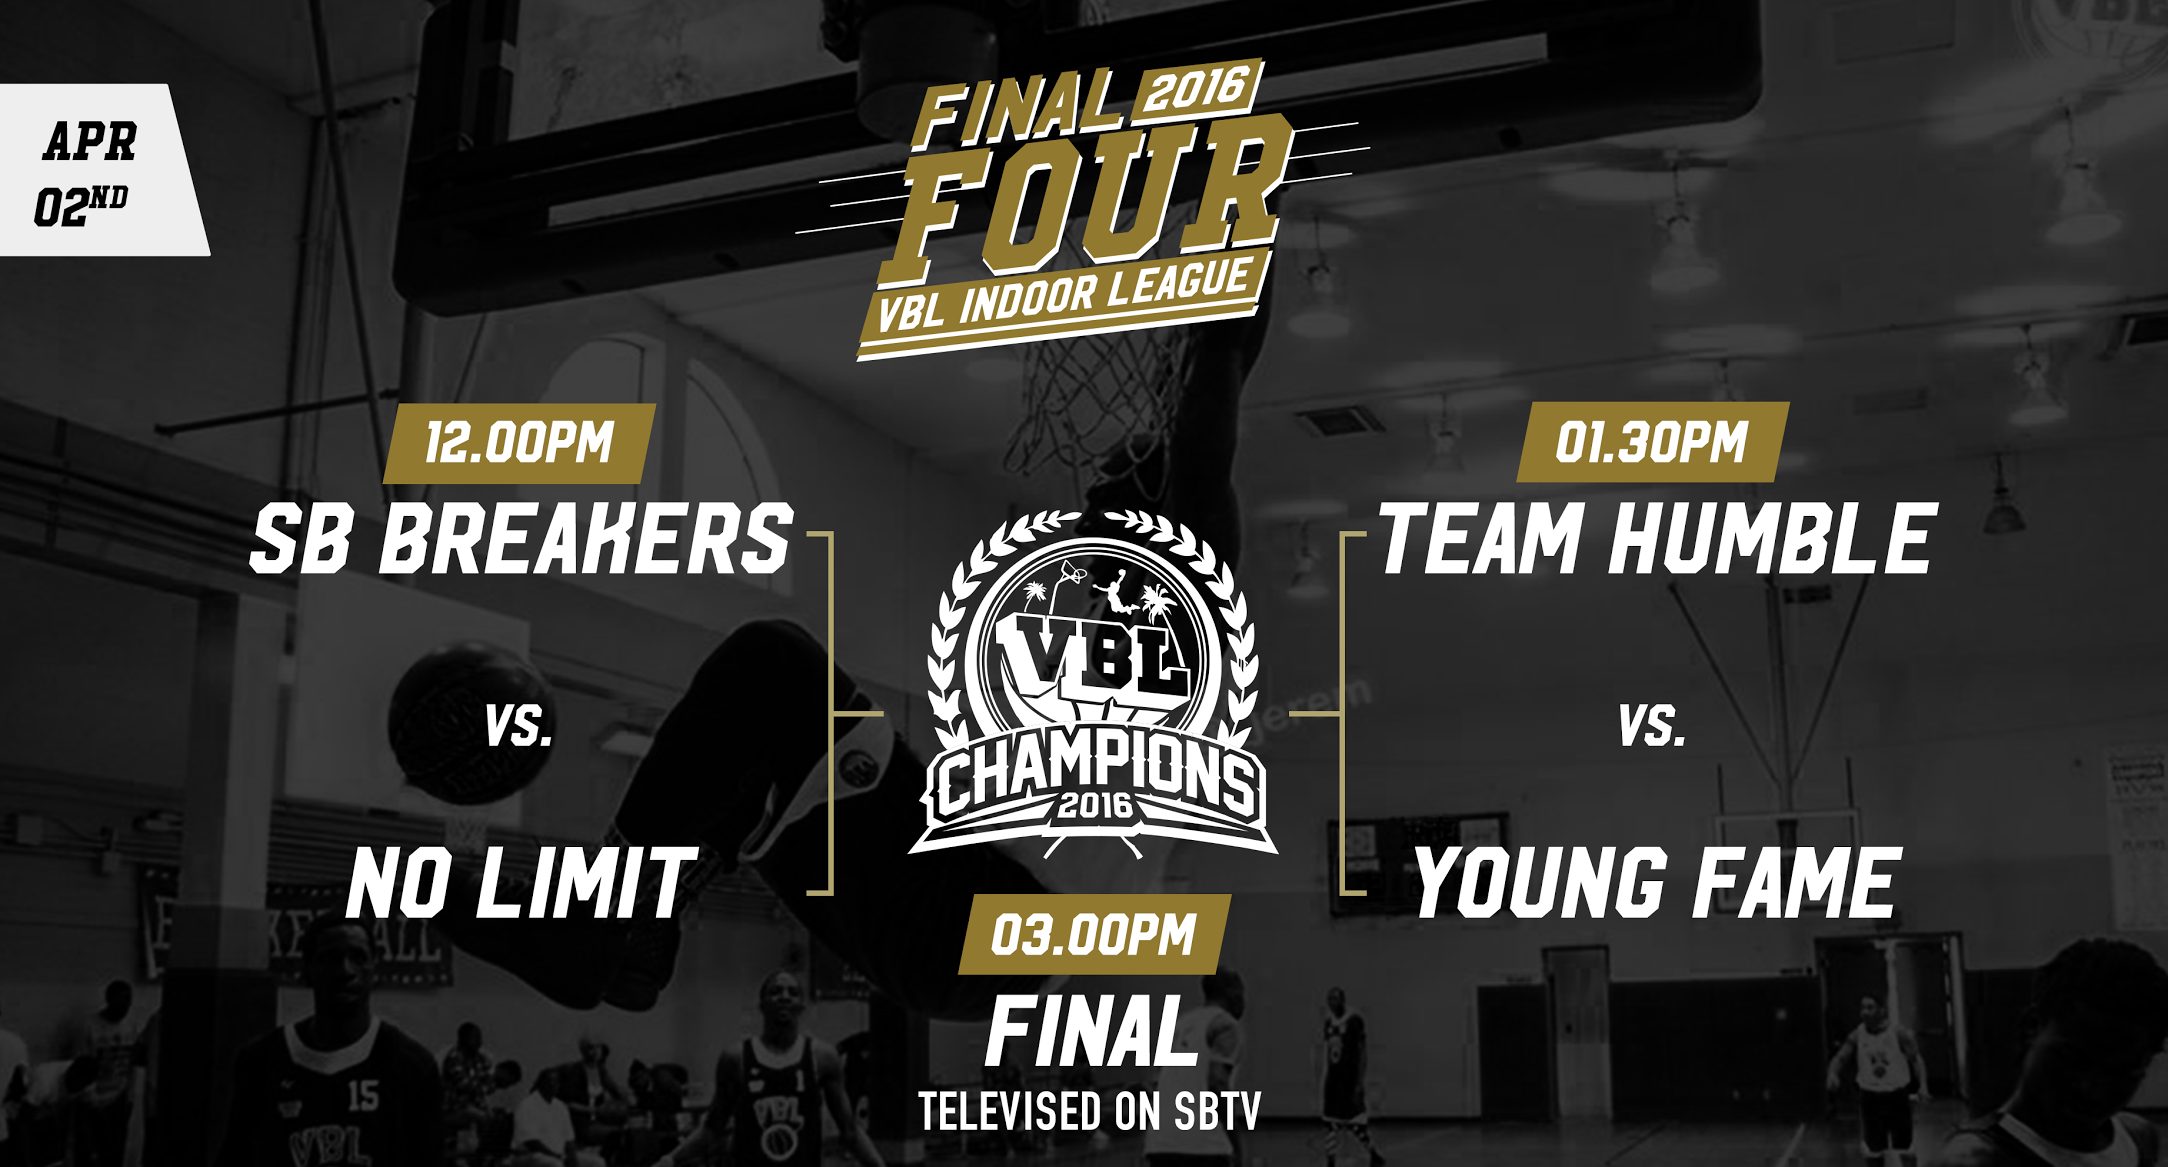 VBL INDOOR FINAL 4 IS HERE + FULL VIDEO